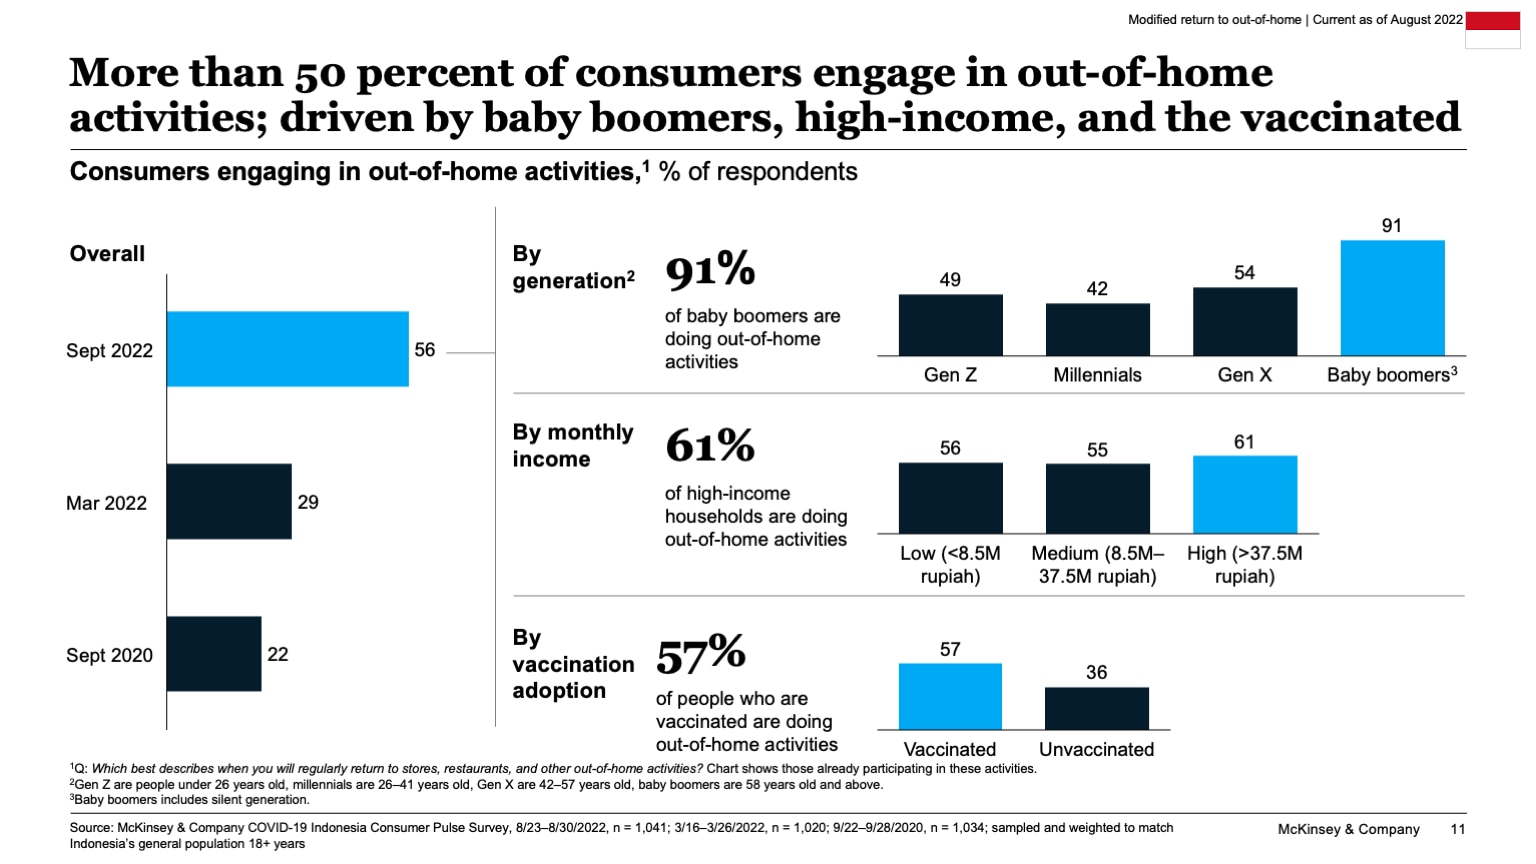 More than 50 percent of consumers engage in out-of-home activities; driven by baby boomers, high-income and the vaccinated